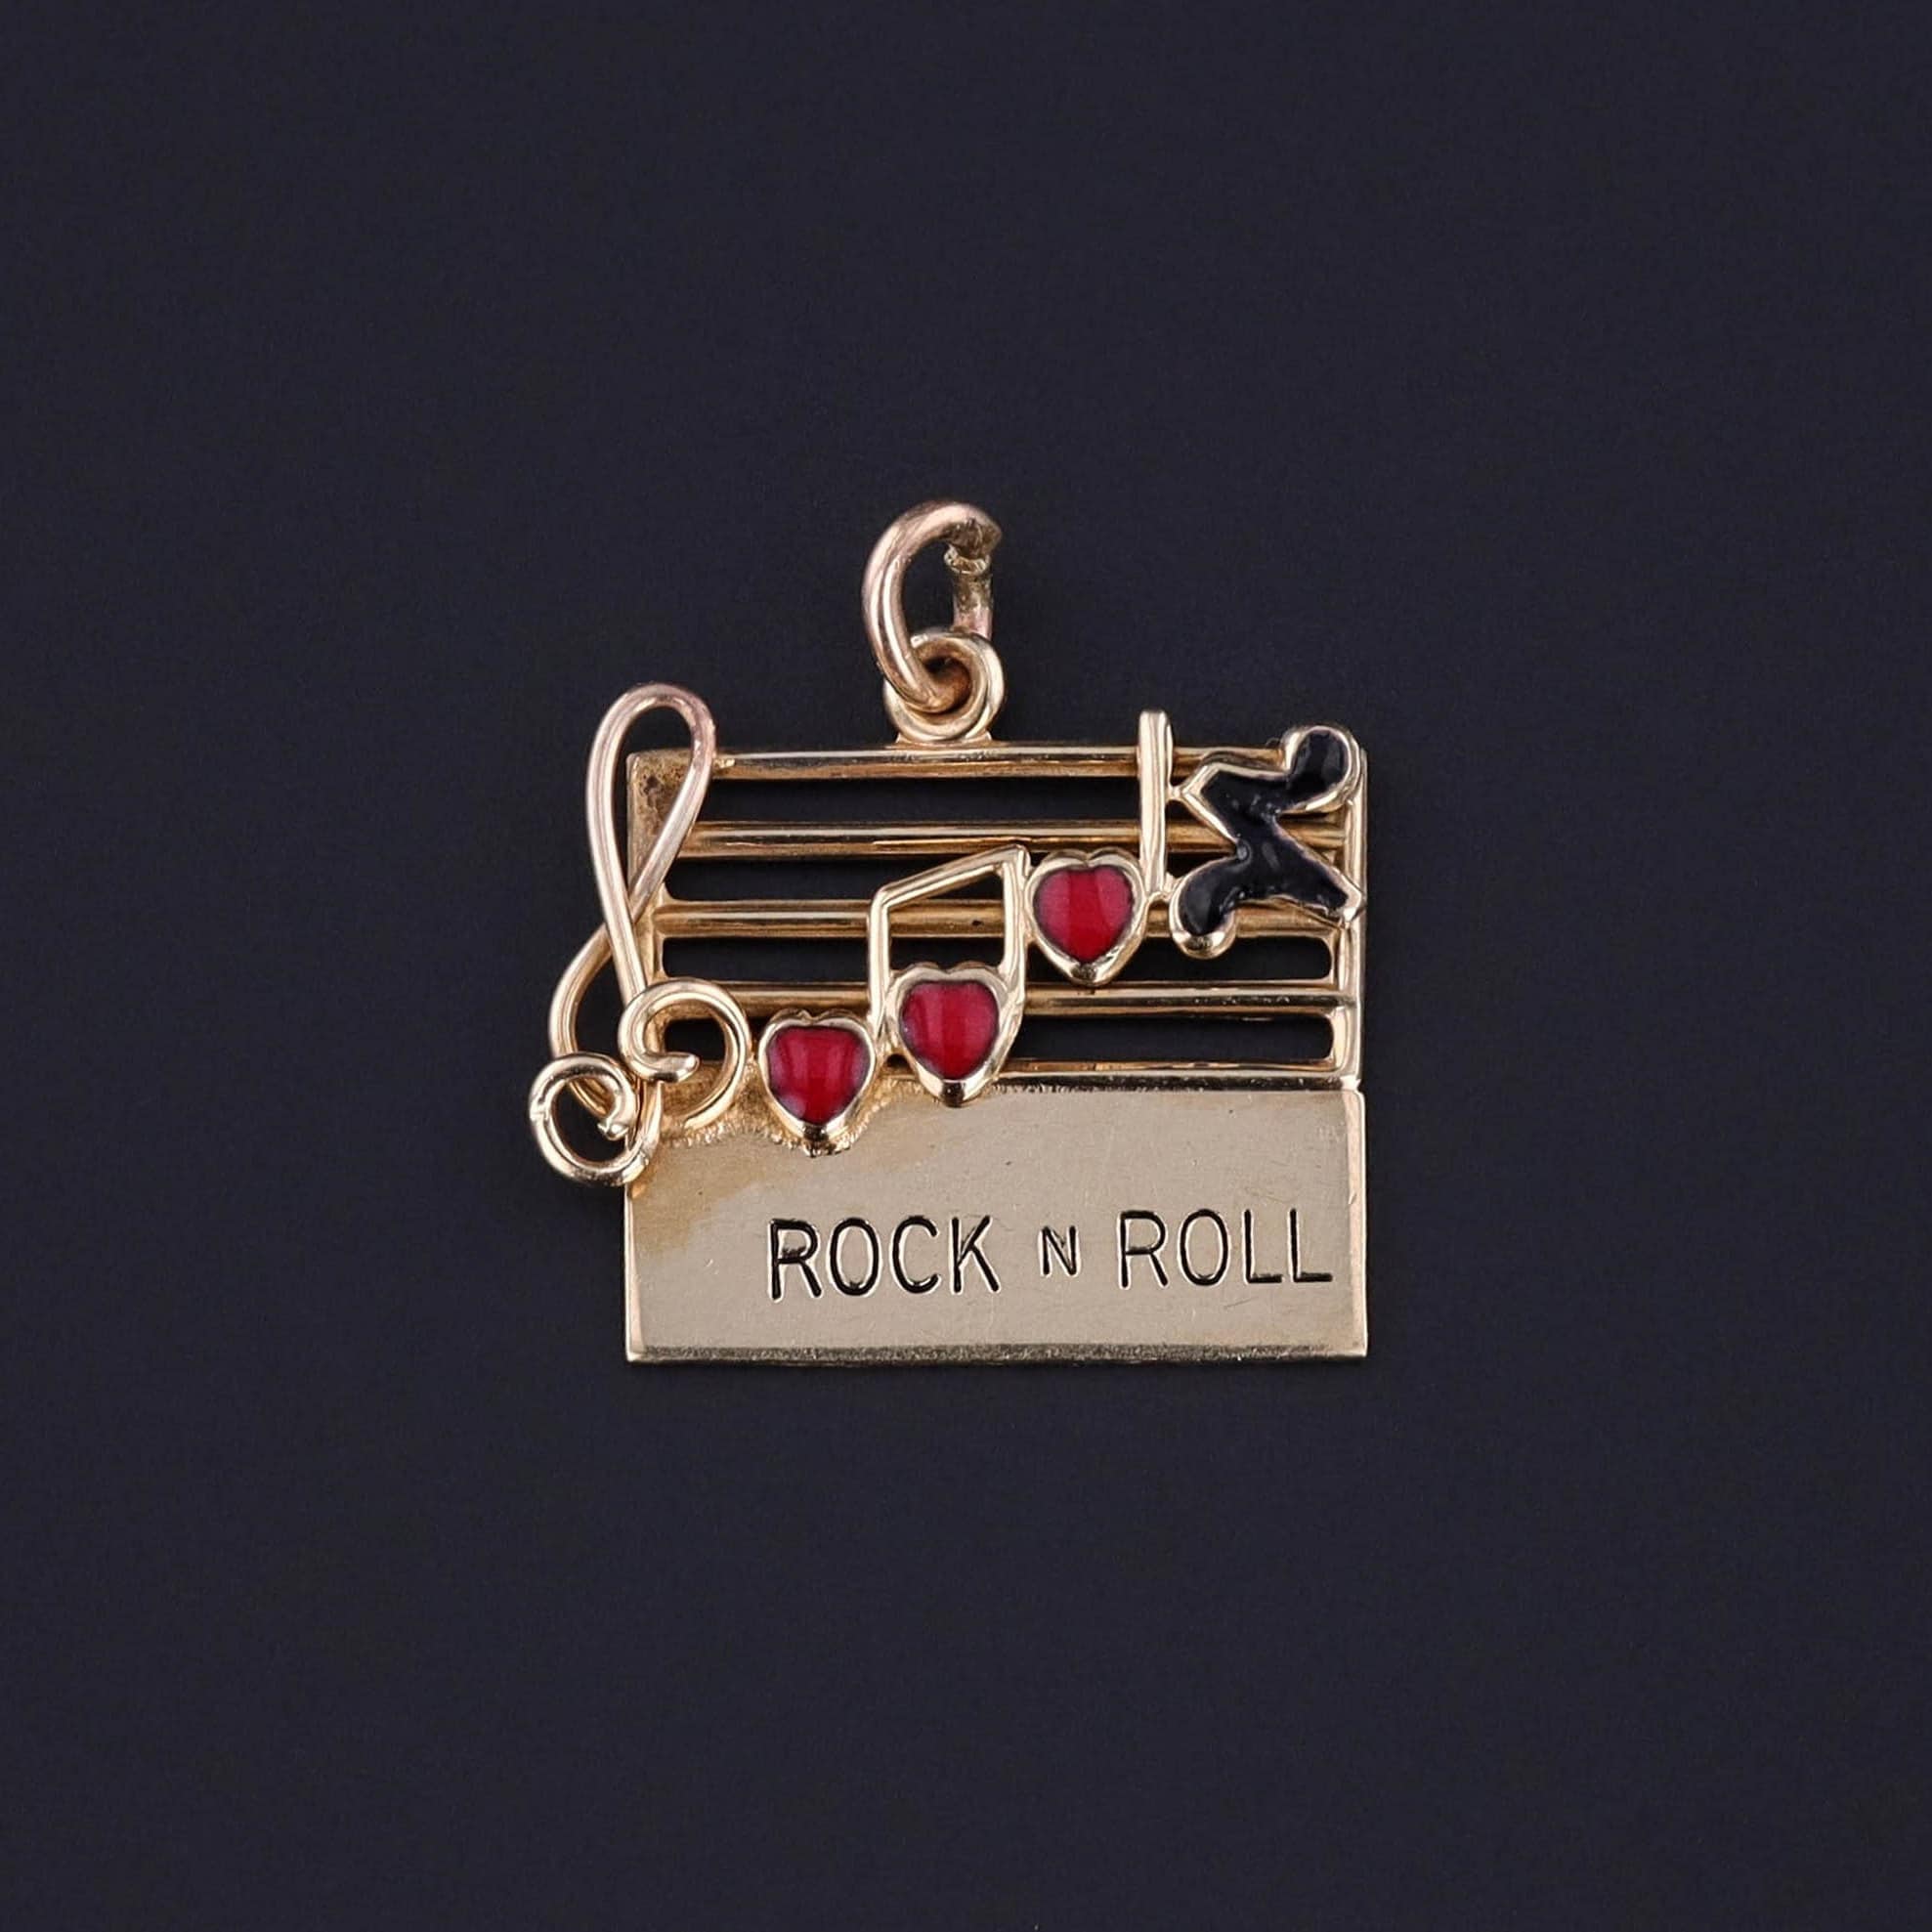 Vintage Rock N Roll Charm: Step into the mid-century with this vintage 1960s charm, featuring a music bar crafted from 14k gold adorned with heart-shaped notes in red and black enamel.